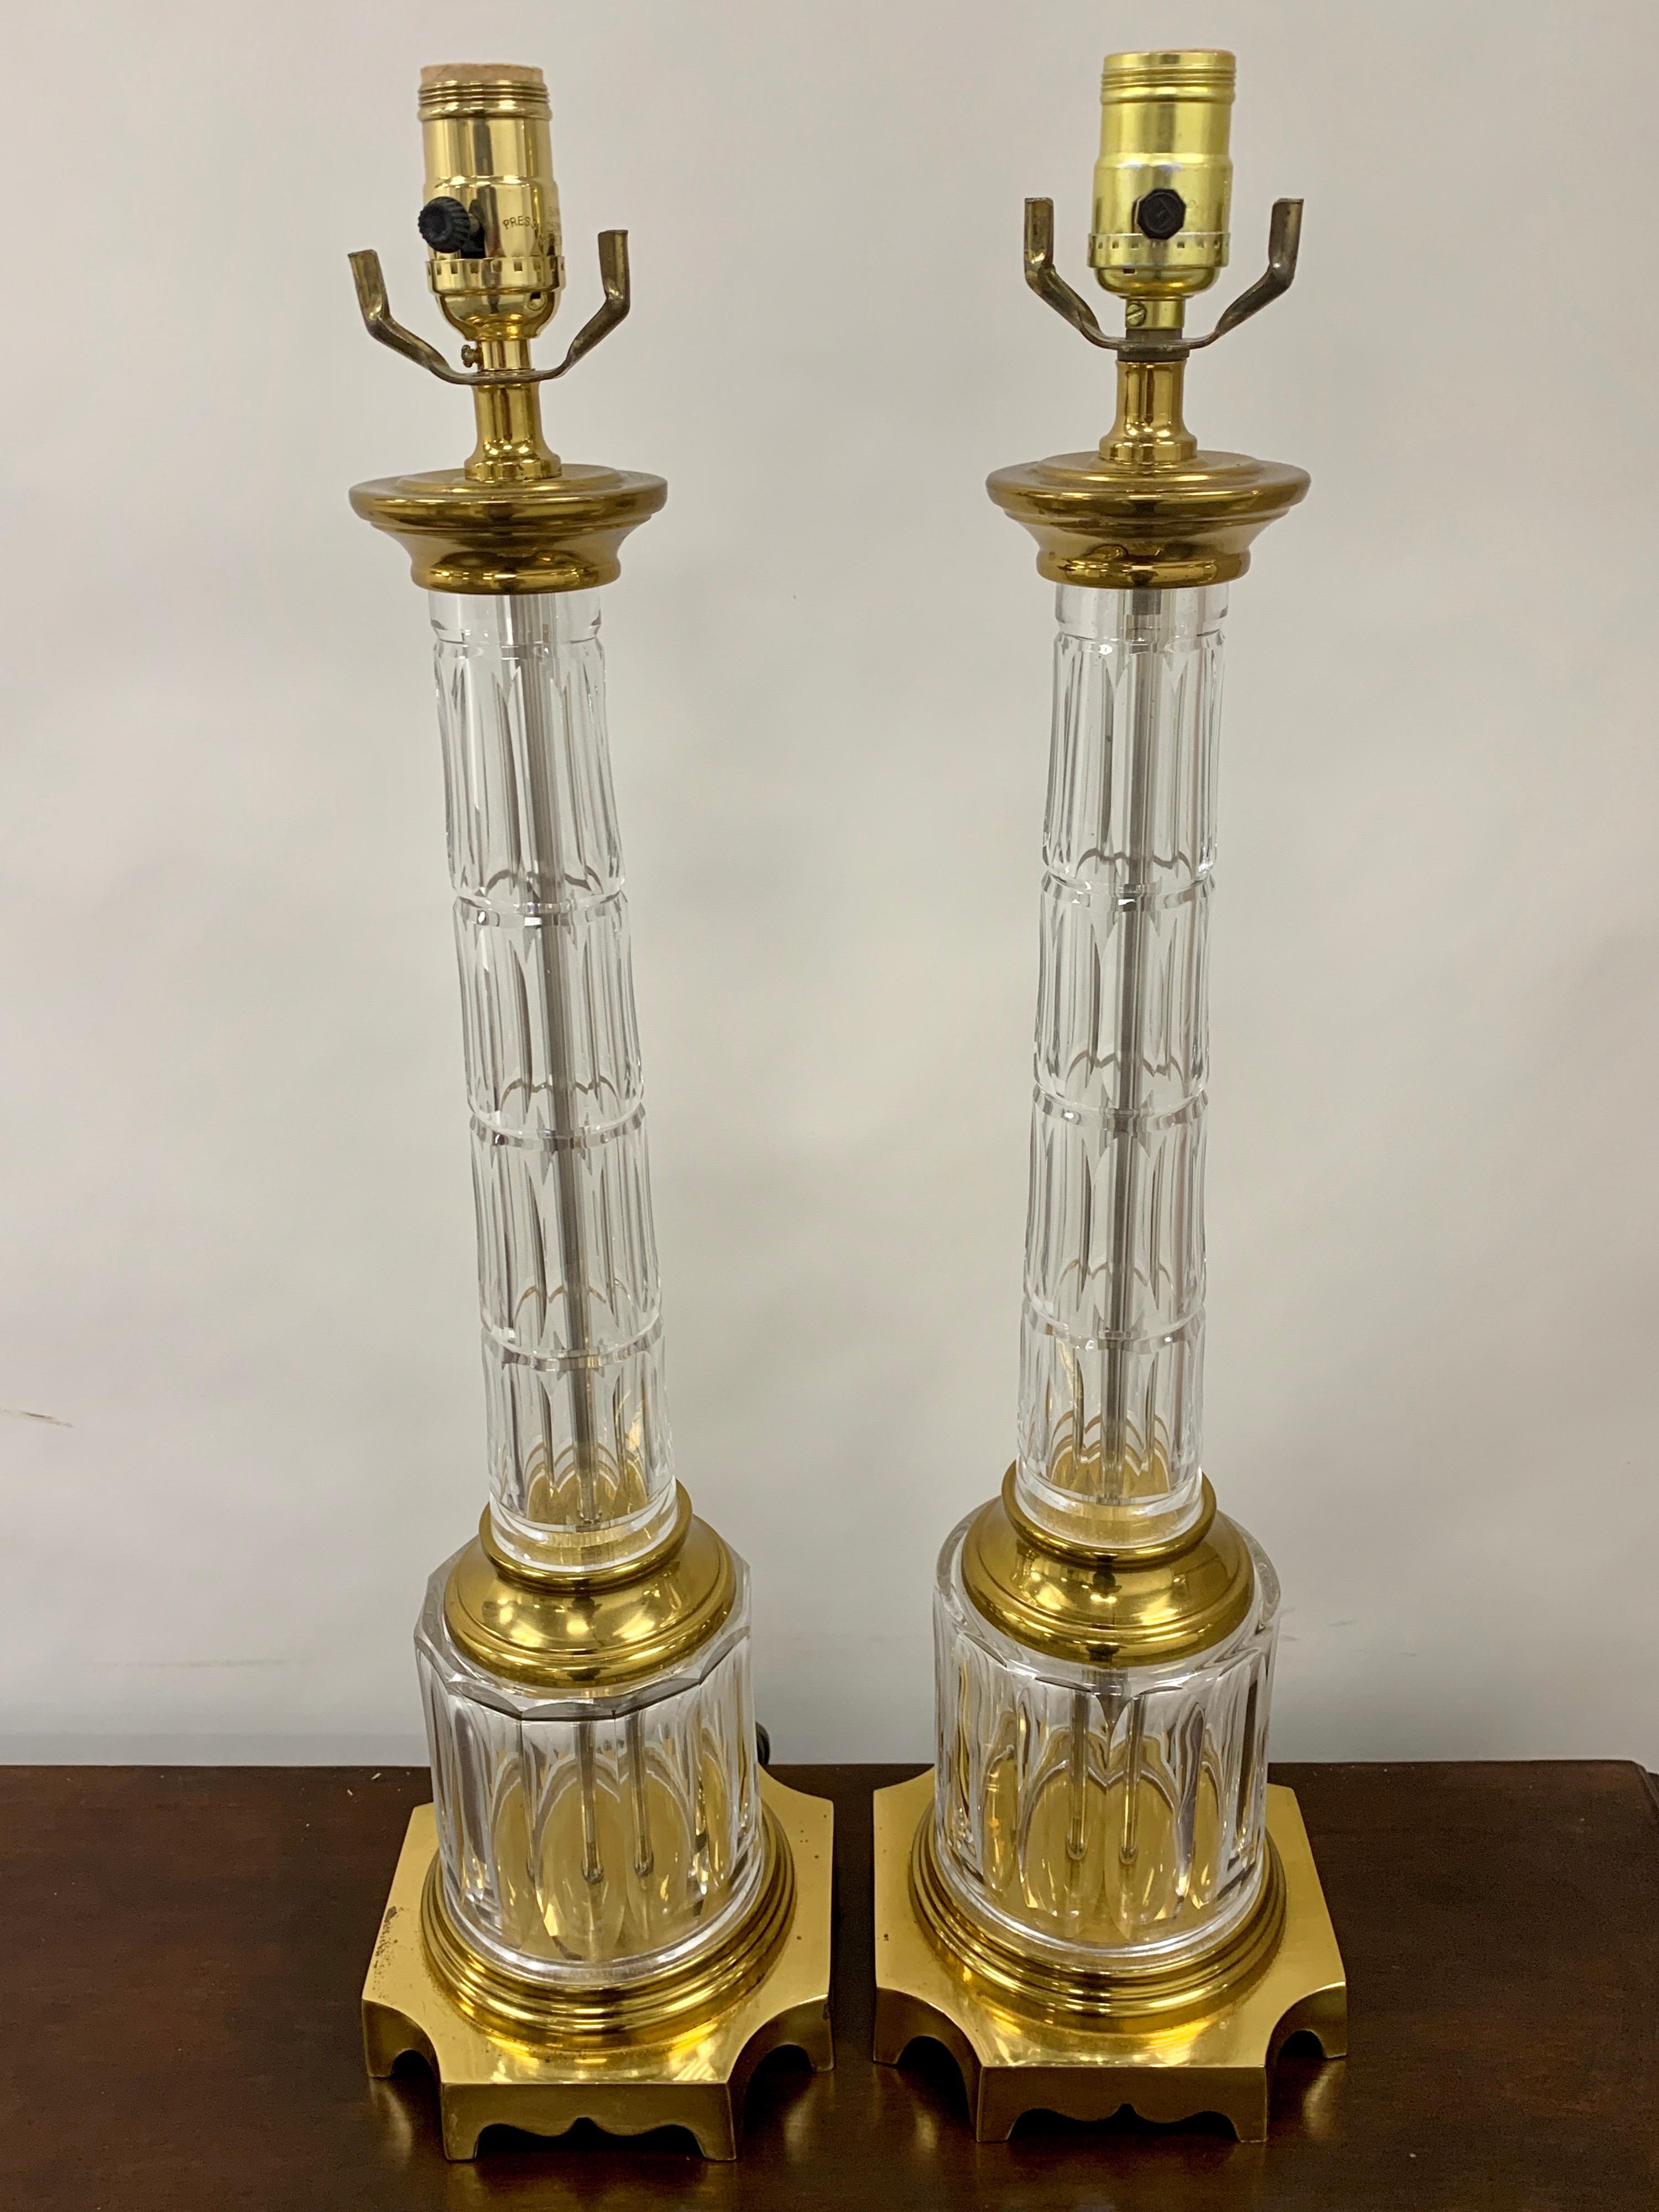 Pair of French Baccarat style cut glass column lamps, each one in the neoclassical style, with panel cut column and base, raised on brass square base. Each lamp has a 6.5